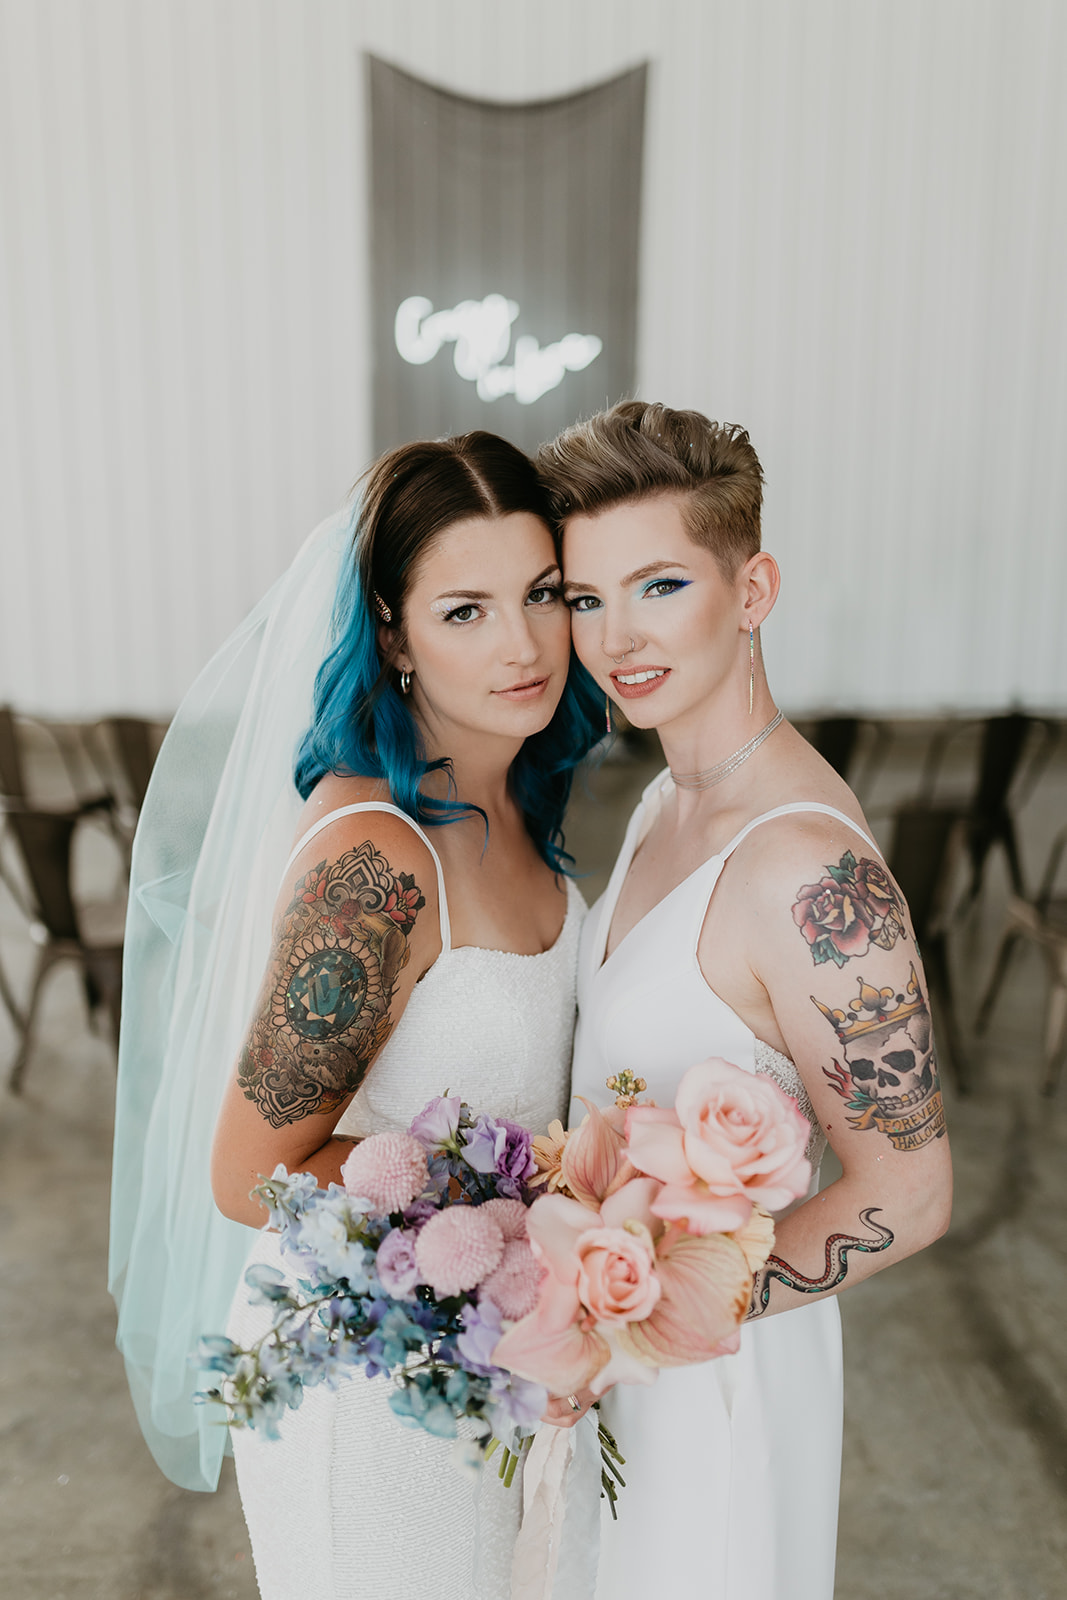 Rocker inspired hair and makeup for brides on their wedding day